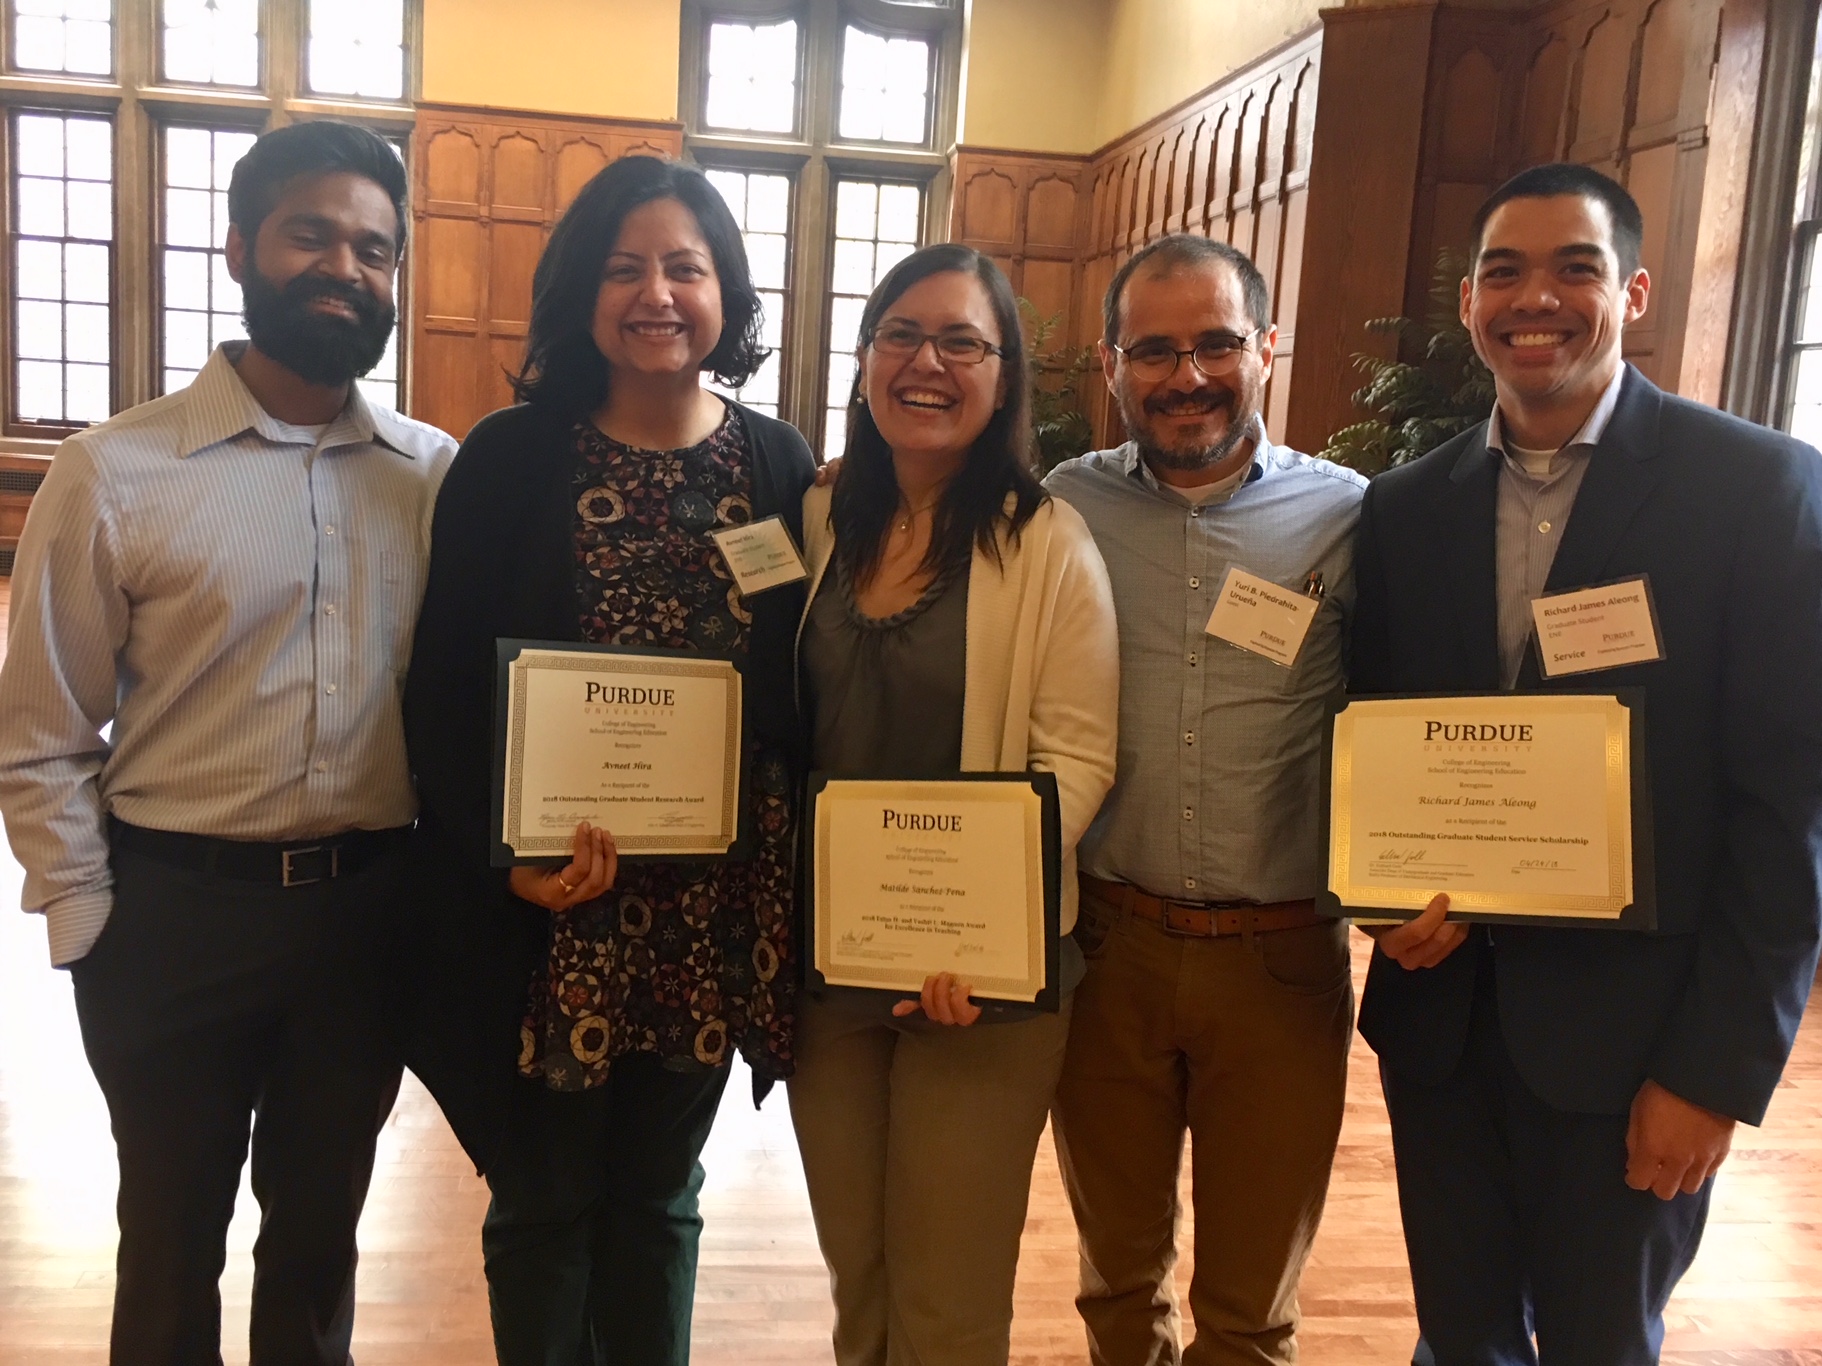 Matilde Sanchez-Pena (center) received this honor for the 2017-18 academic school year. Eligible candidates must have a half-time or more appointment as a graduate instructor or graduate teaching assistant for at least one semester in the past calendar year. Matilde has helped us greatly with the First-Year Engineering course load and we are appreciate her drive to step up and help while balancing her graduate research activities.